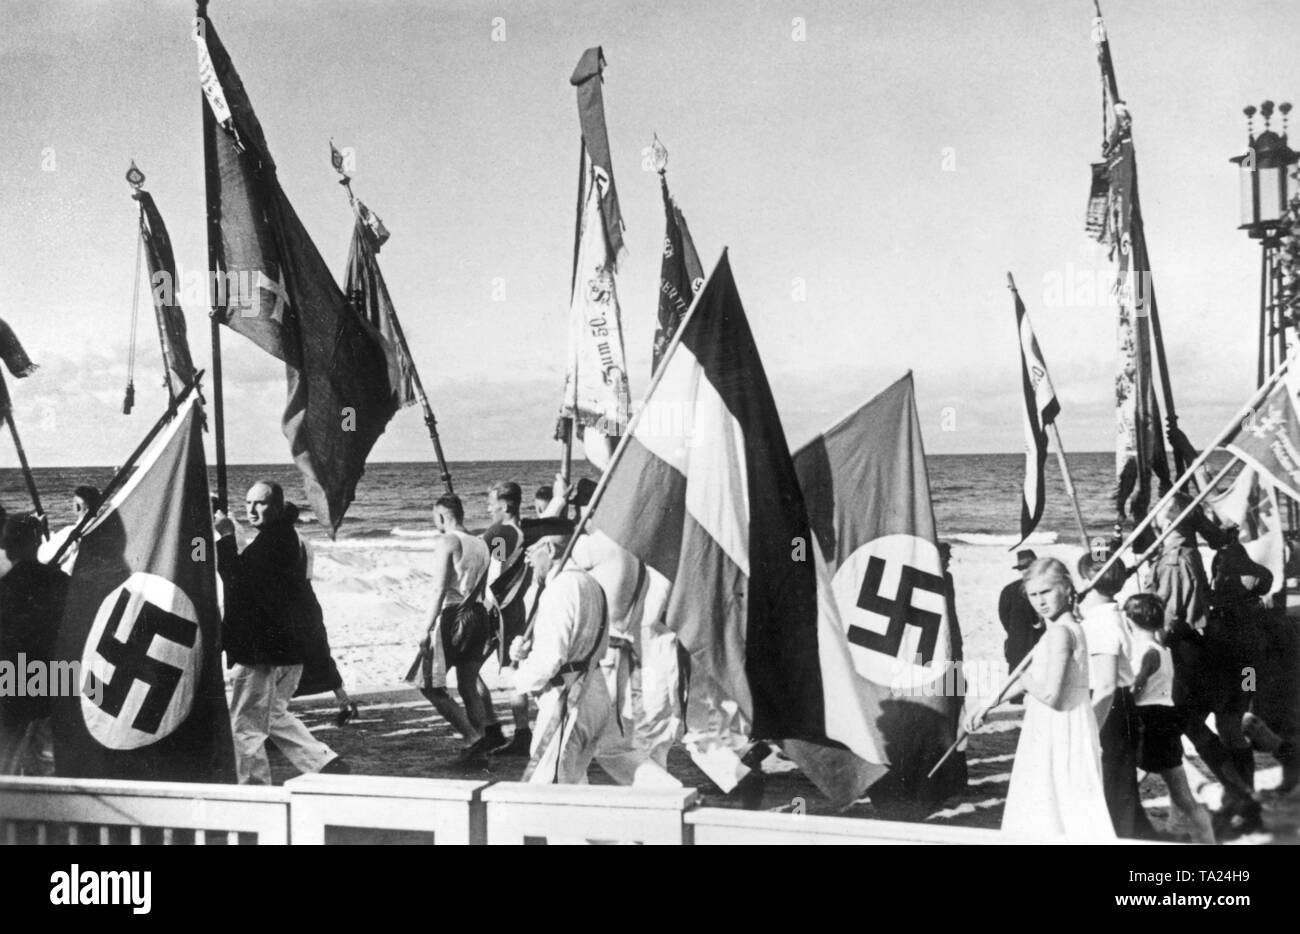 The frontier tournament of the Gaus of East Prussia, Gdansk and Pomerania took place in Gdansk. A National Socialist rally took place at the opening ceremony in the Kurgarten (spa garden) in Sopot. In the photo, the color guards on their way to the rally. Stock Photo